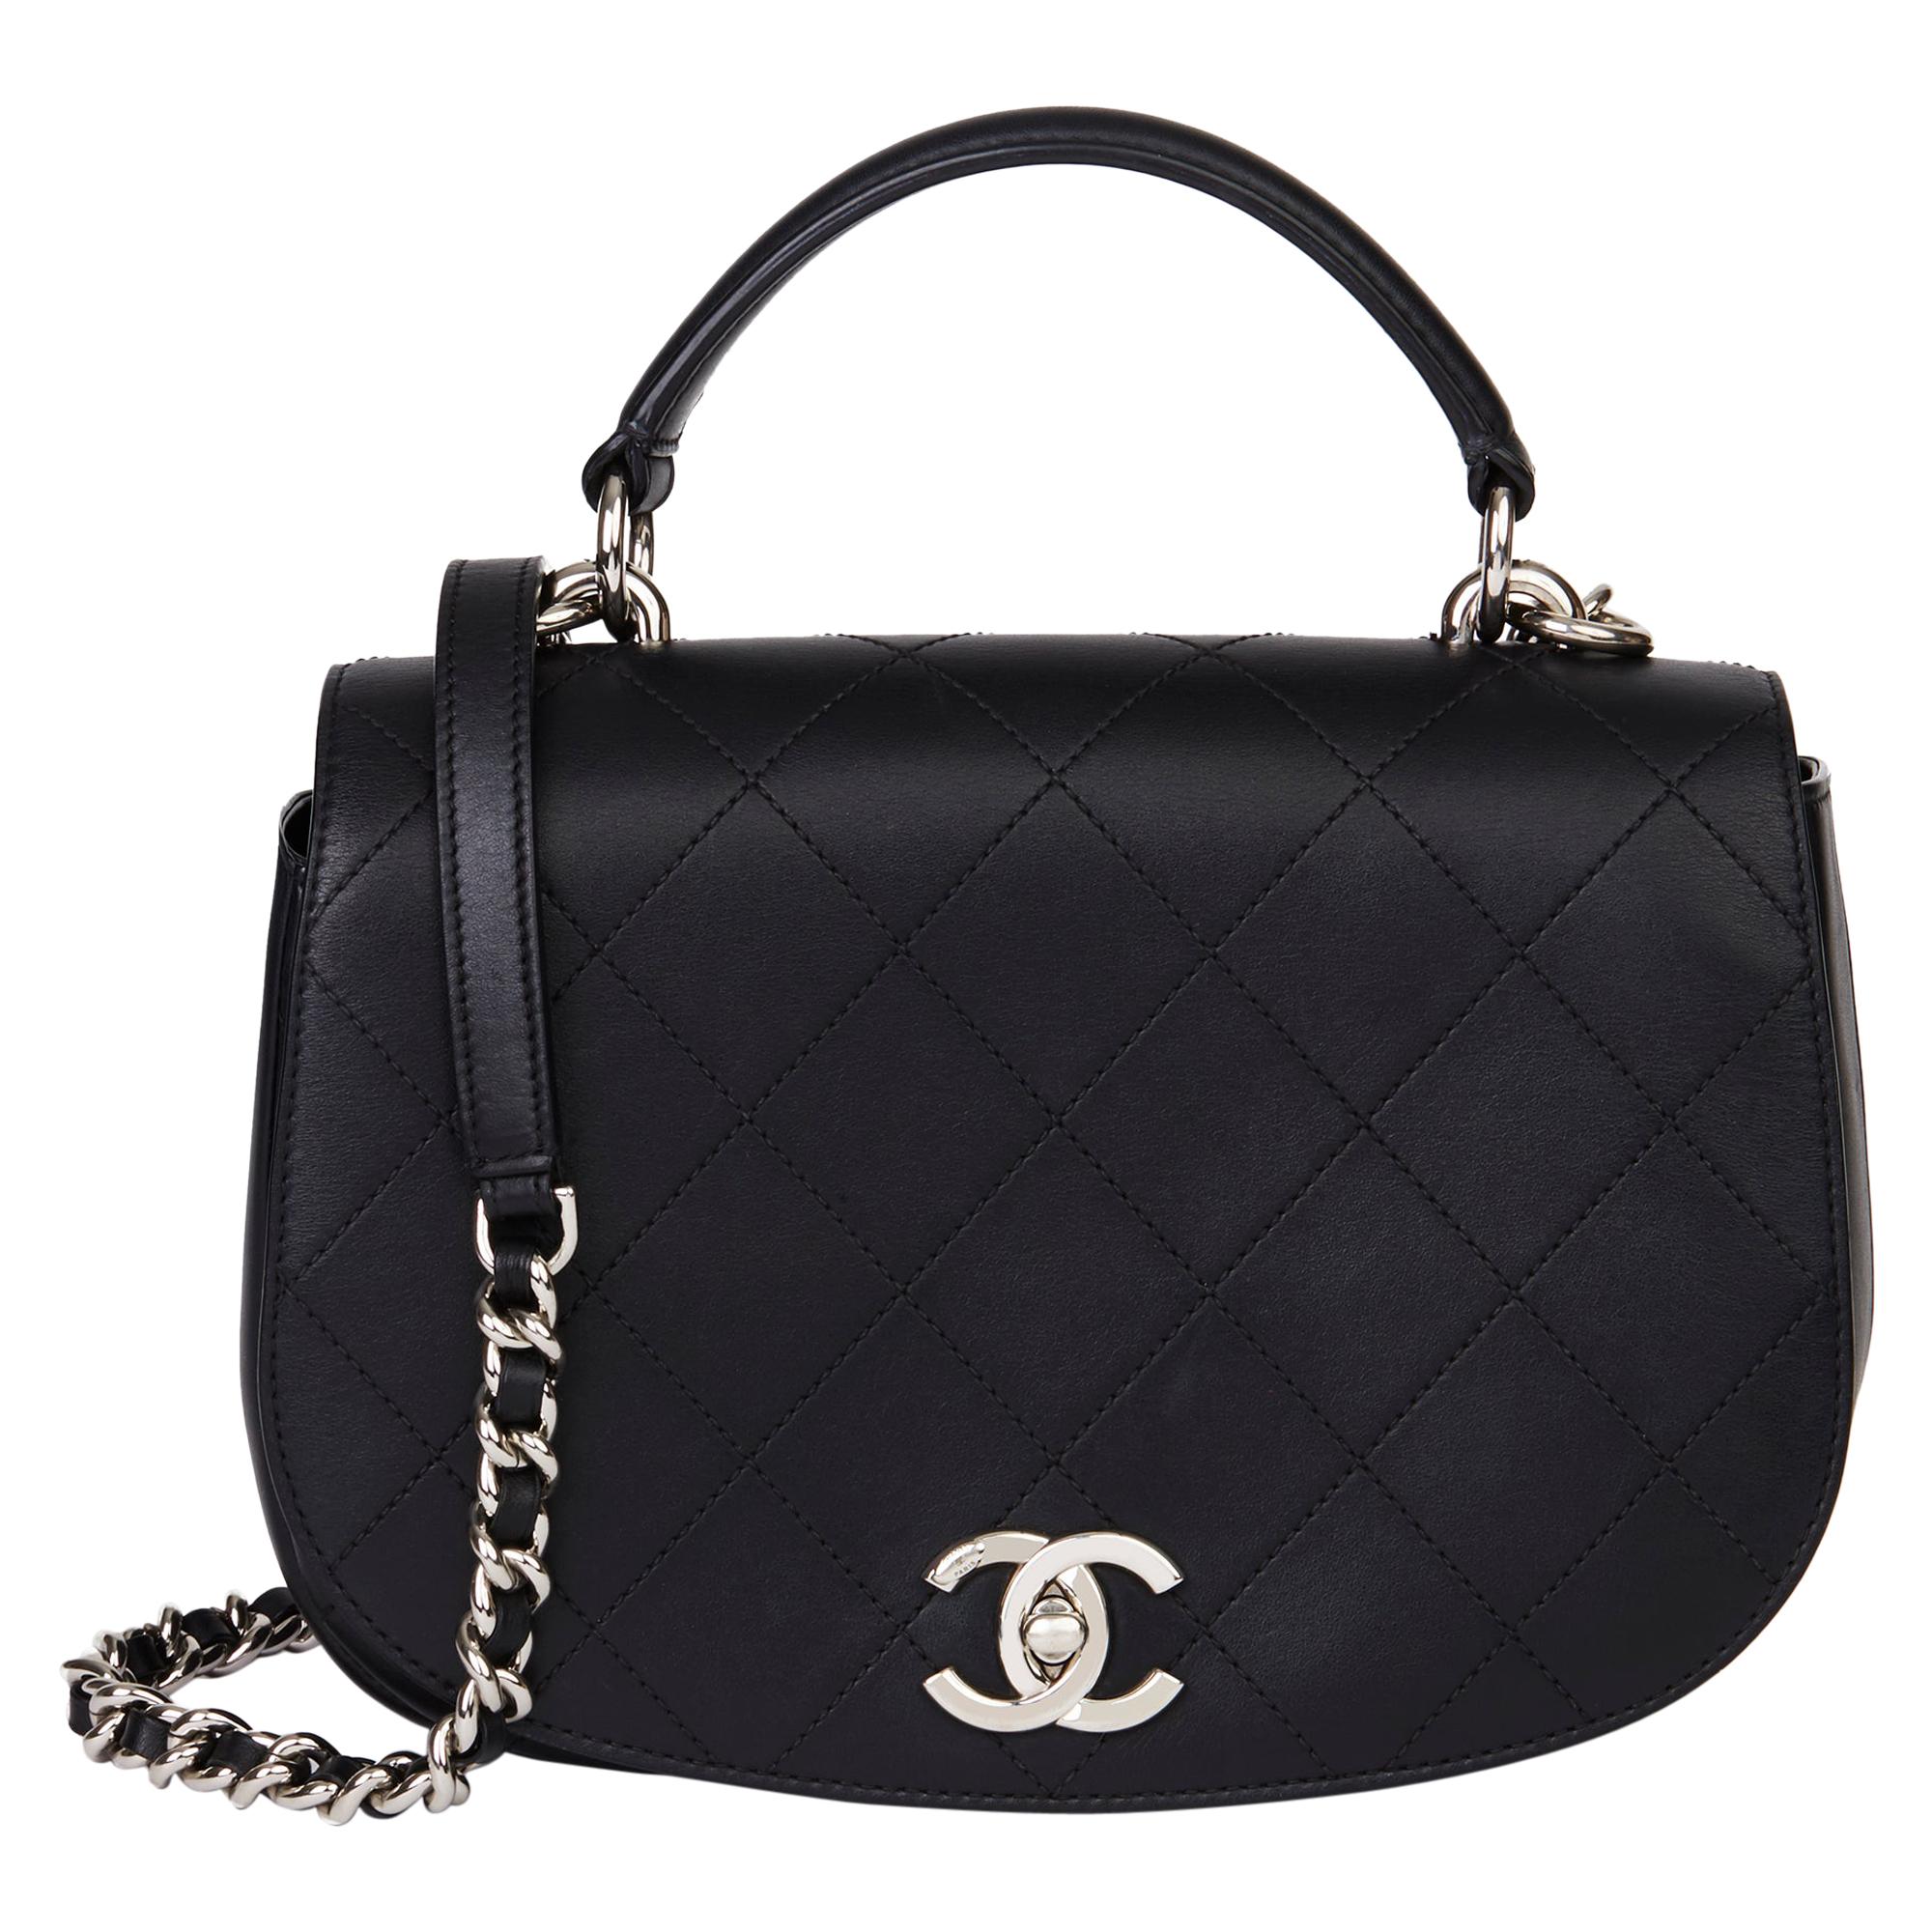 2017 Chanel Black Quilted Calfskin Leather Ring My Bag Flap Bag